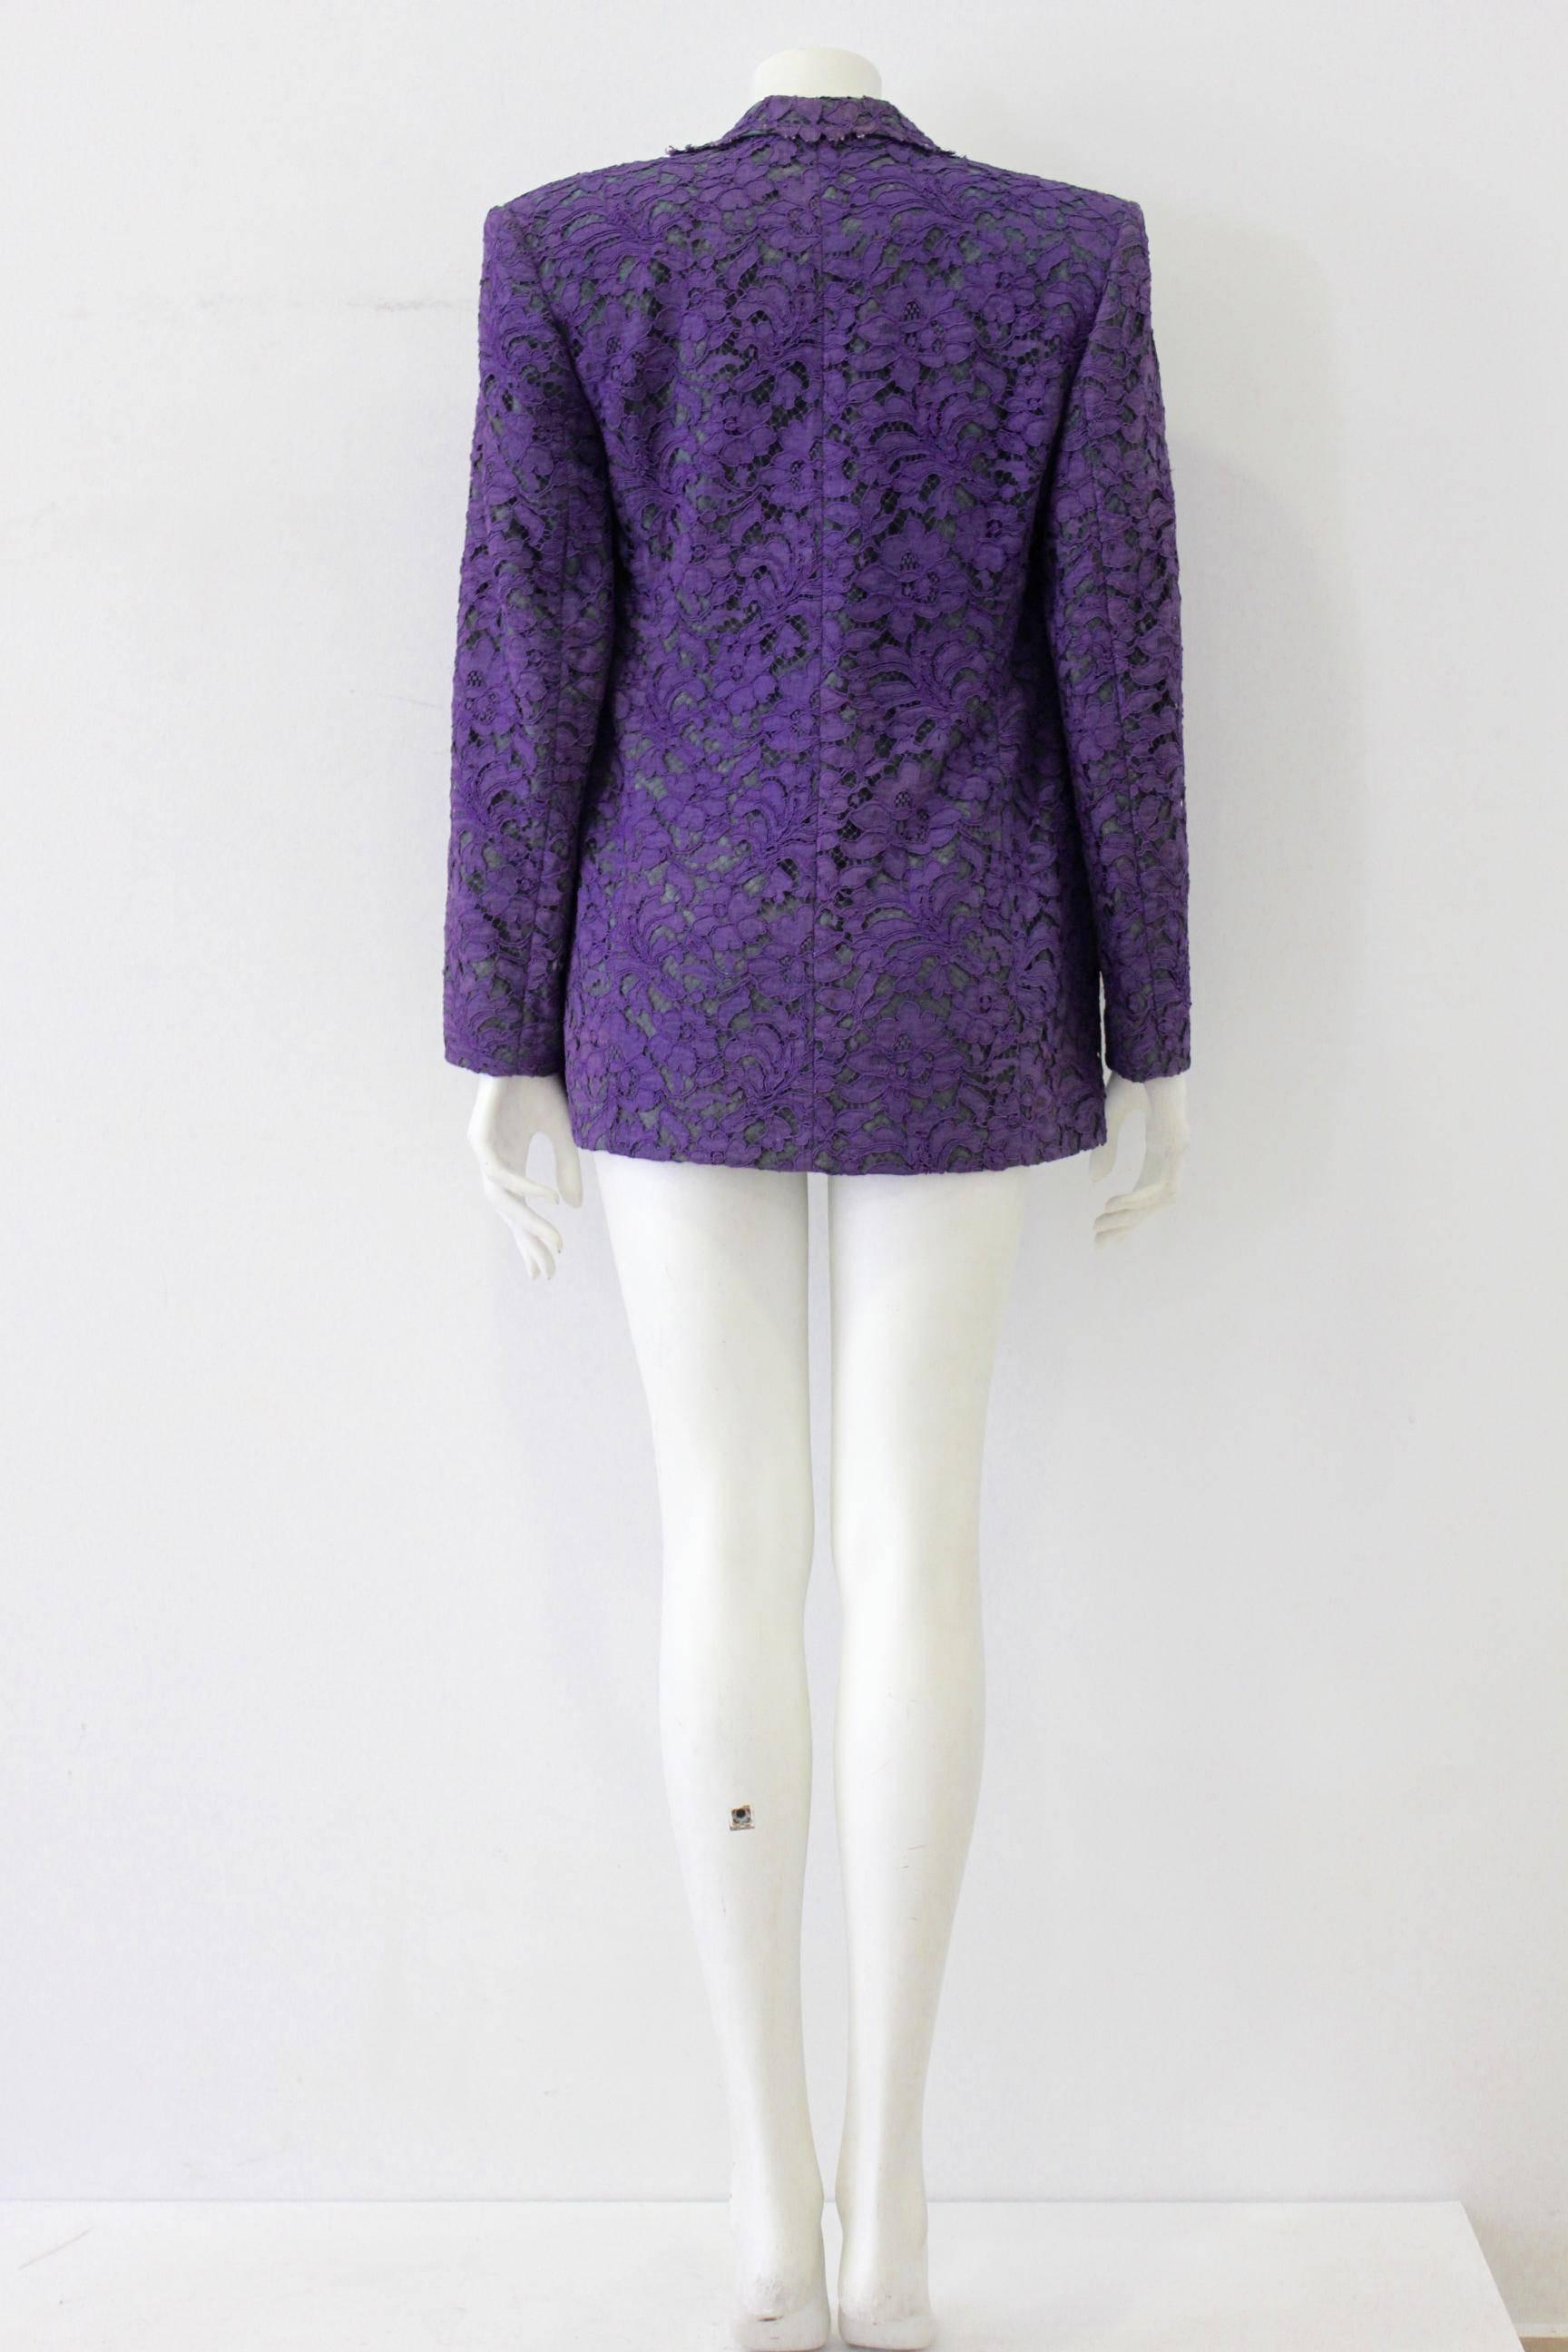 Exquisite Gianfranco Ferre Royal Purple Lace Jacket In New Condition For Sale In Athens, Agia Paraskevi